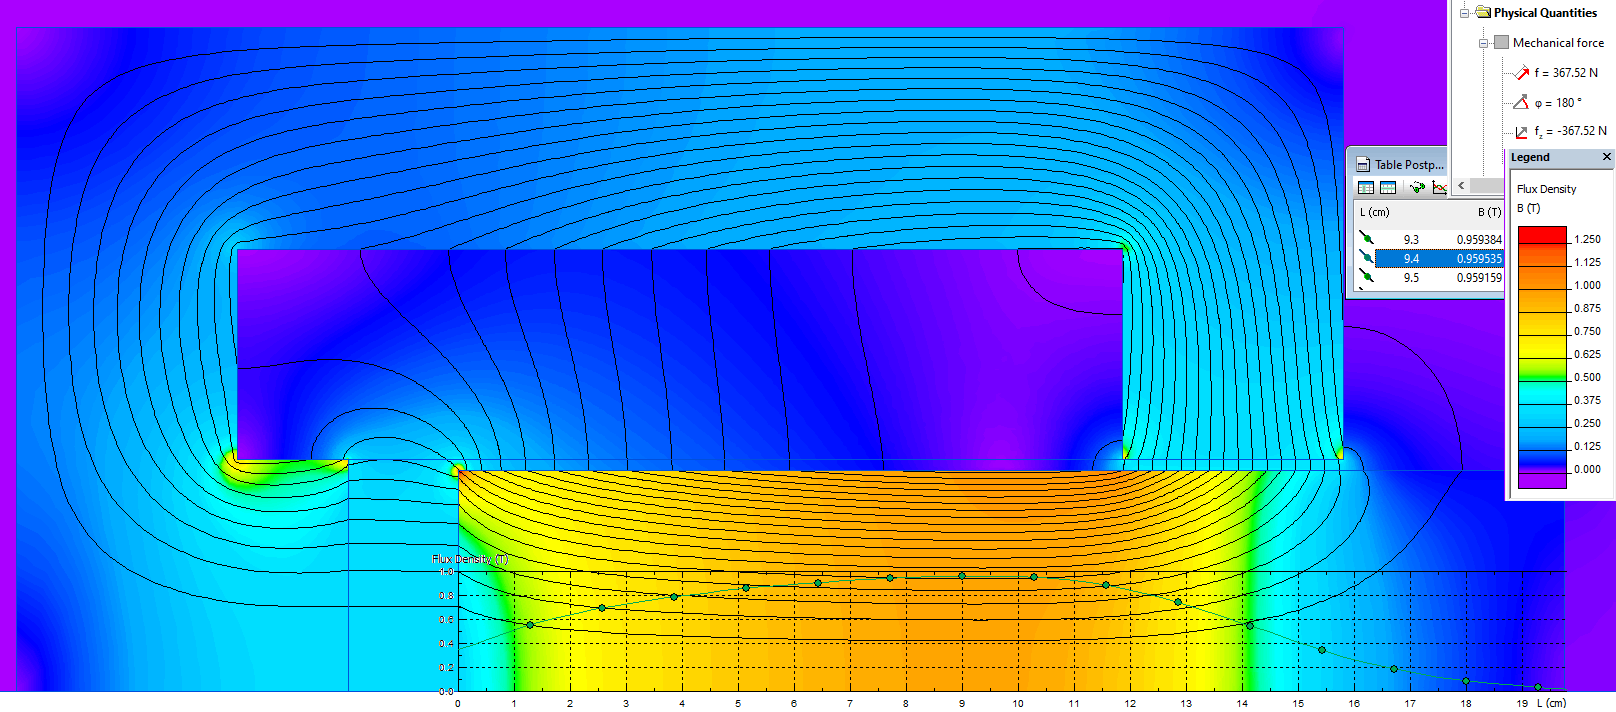 Flux density in the actuator plunger